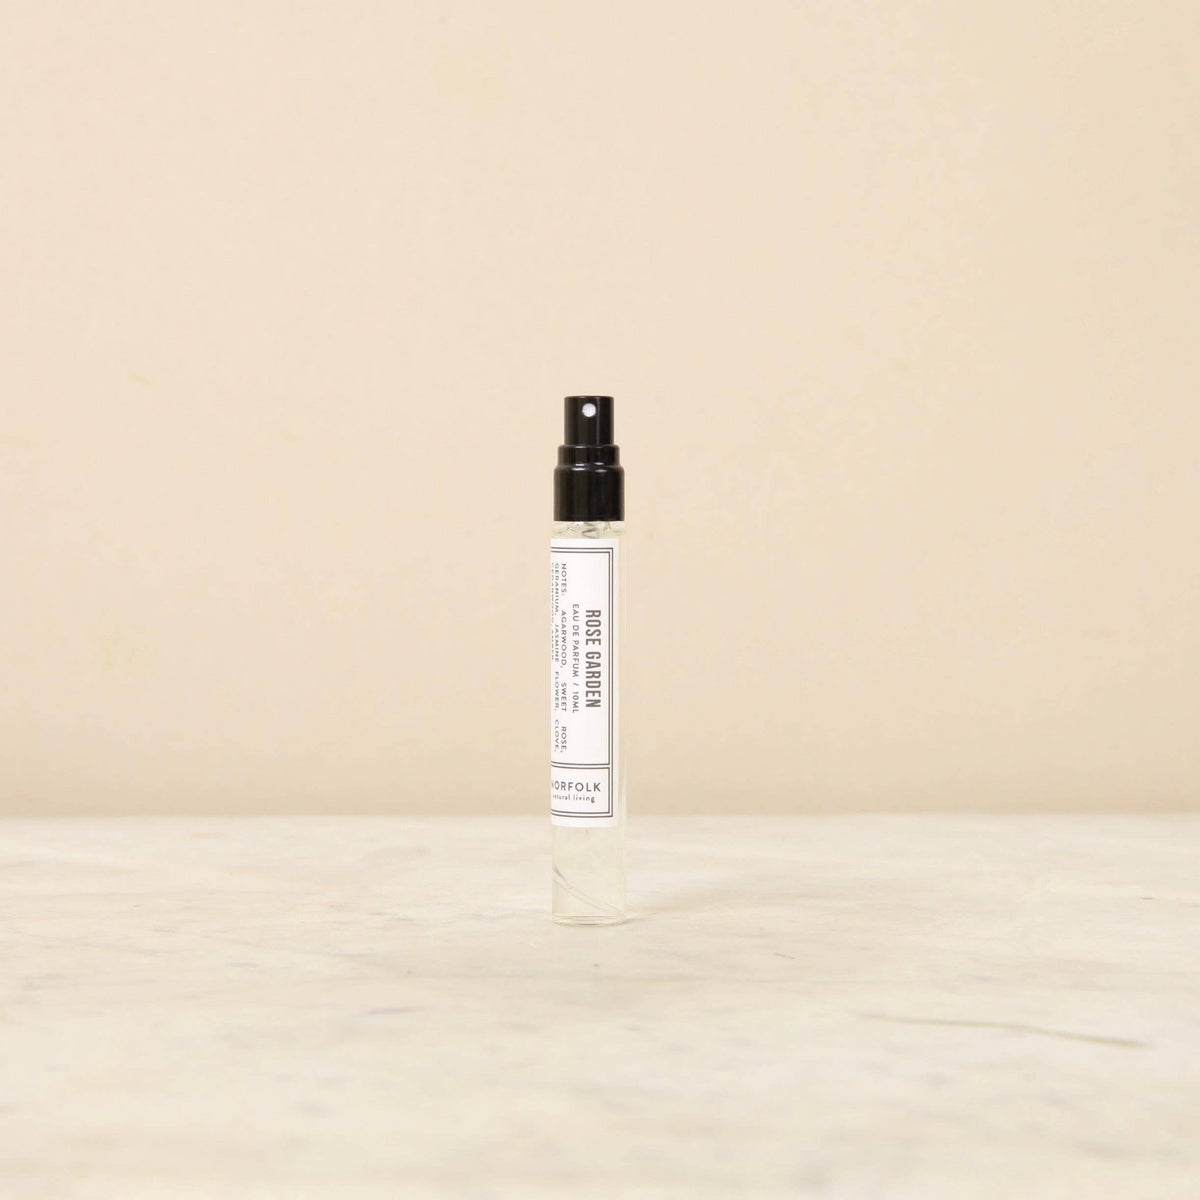 A small bottle of Norfolk Natural Living Parfum - Rose Garden 10ml with a long-lasting fragrance, reminiscent of a Rose Garden.